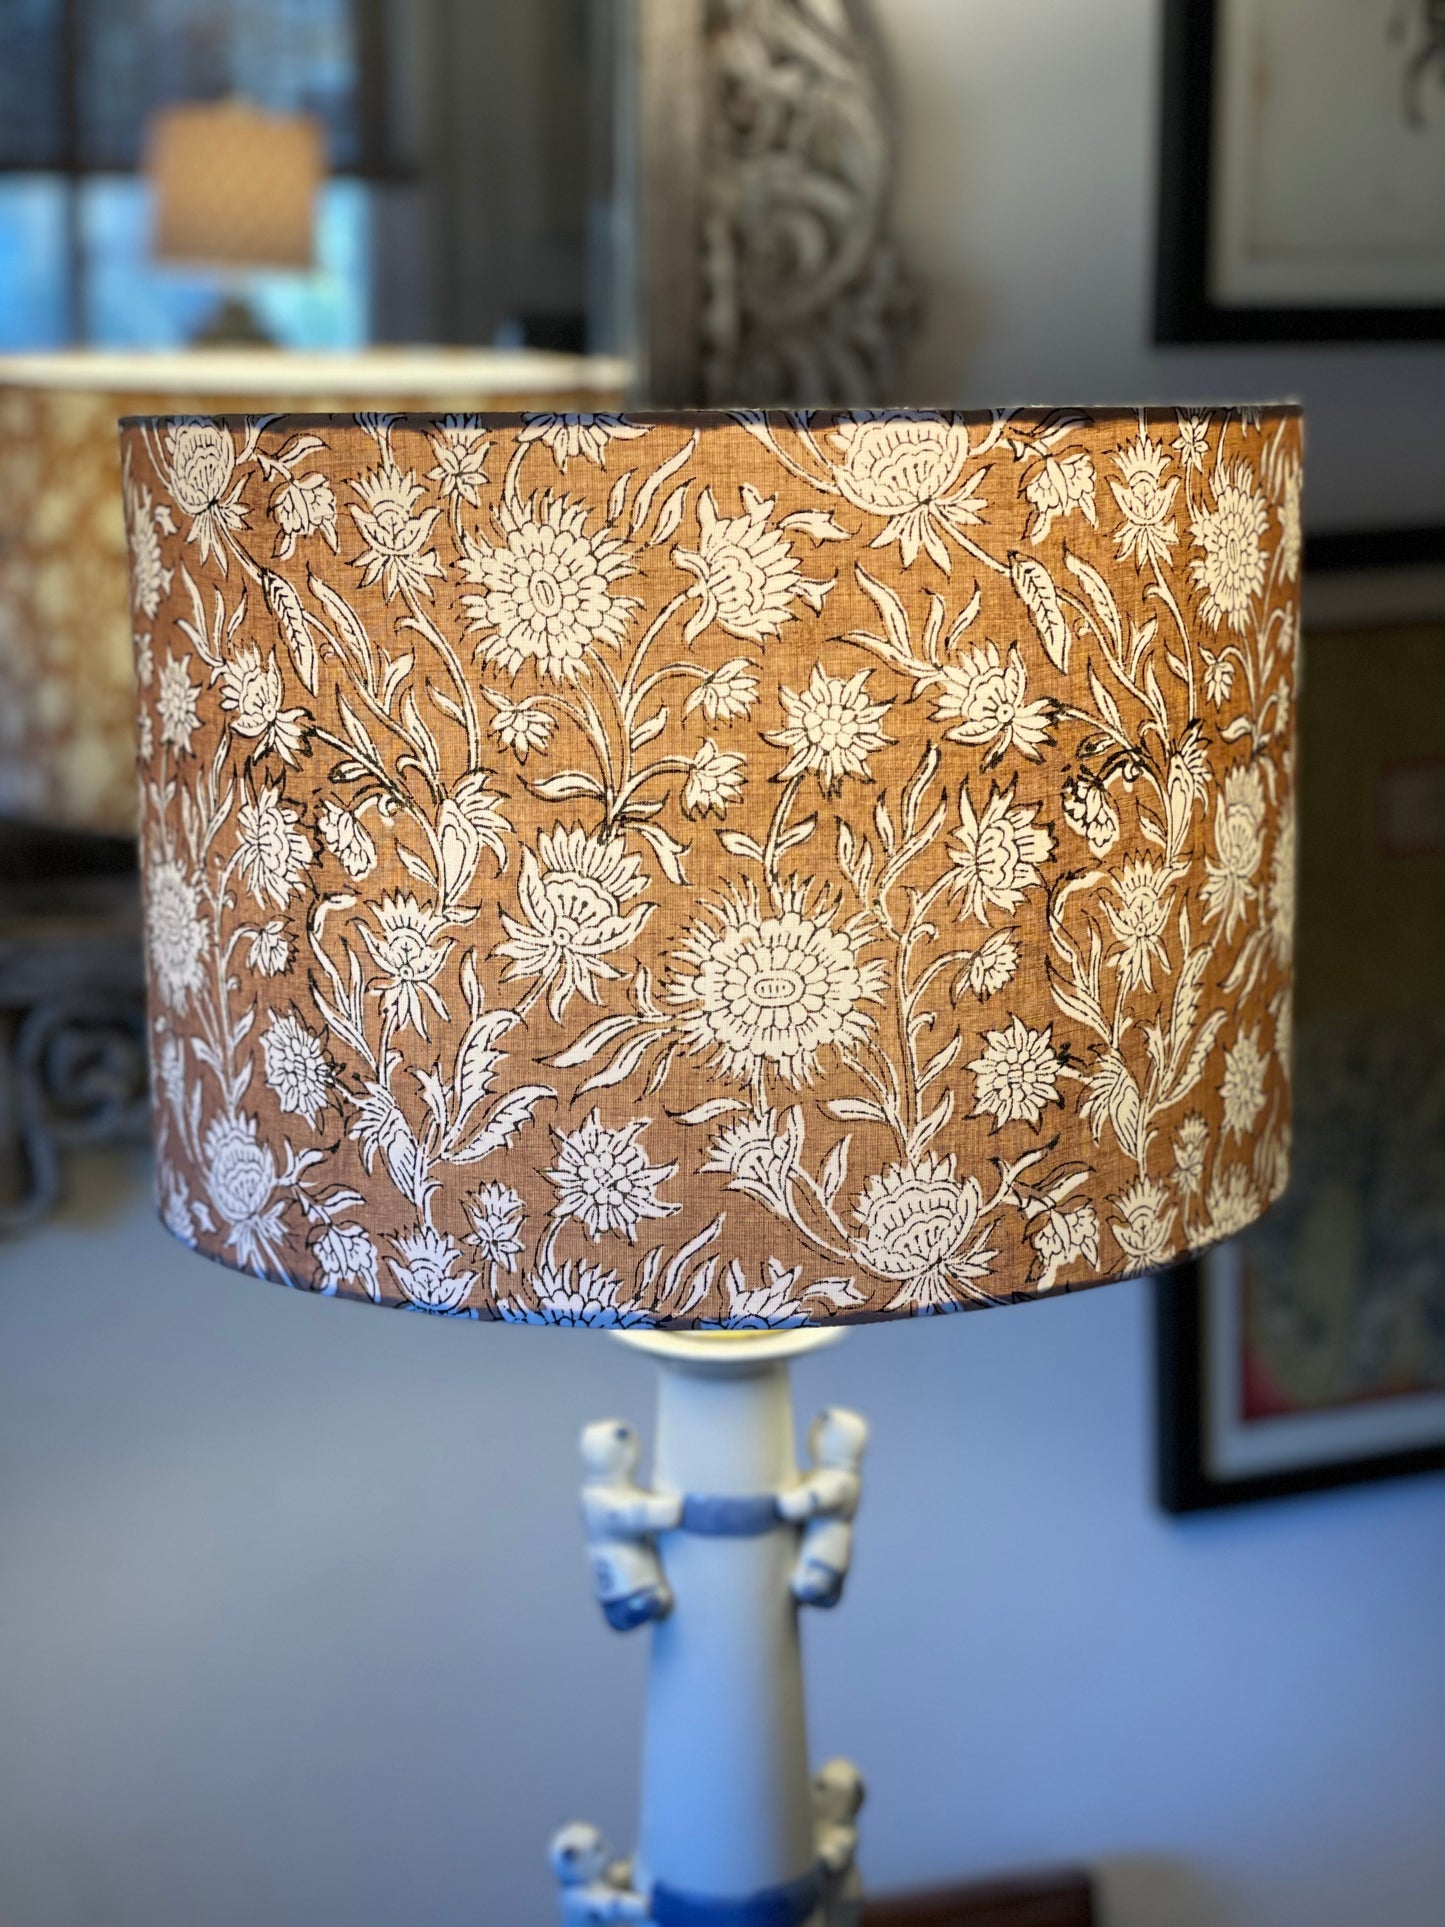 12 Inch Drum Shade. Hand Block Print from Jaipur. Camel and Ivory Floral Motif.